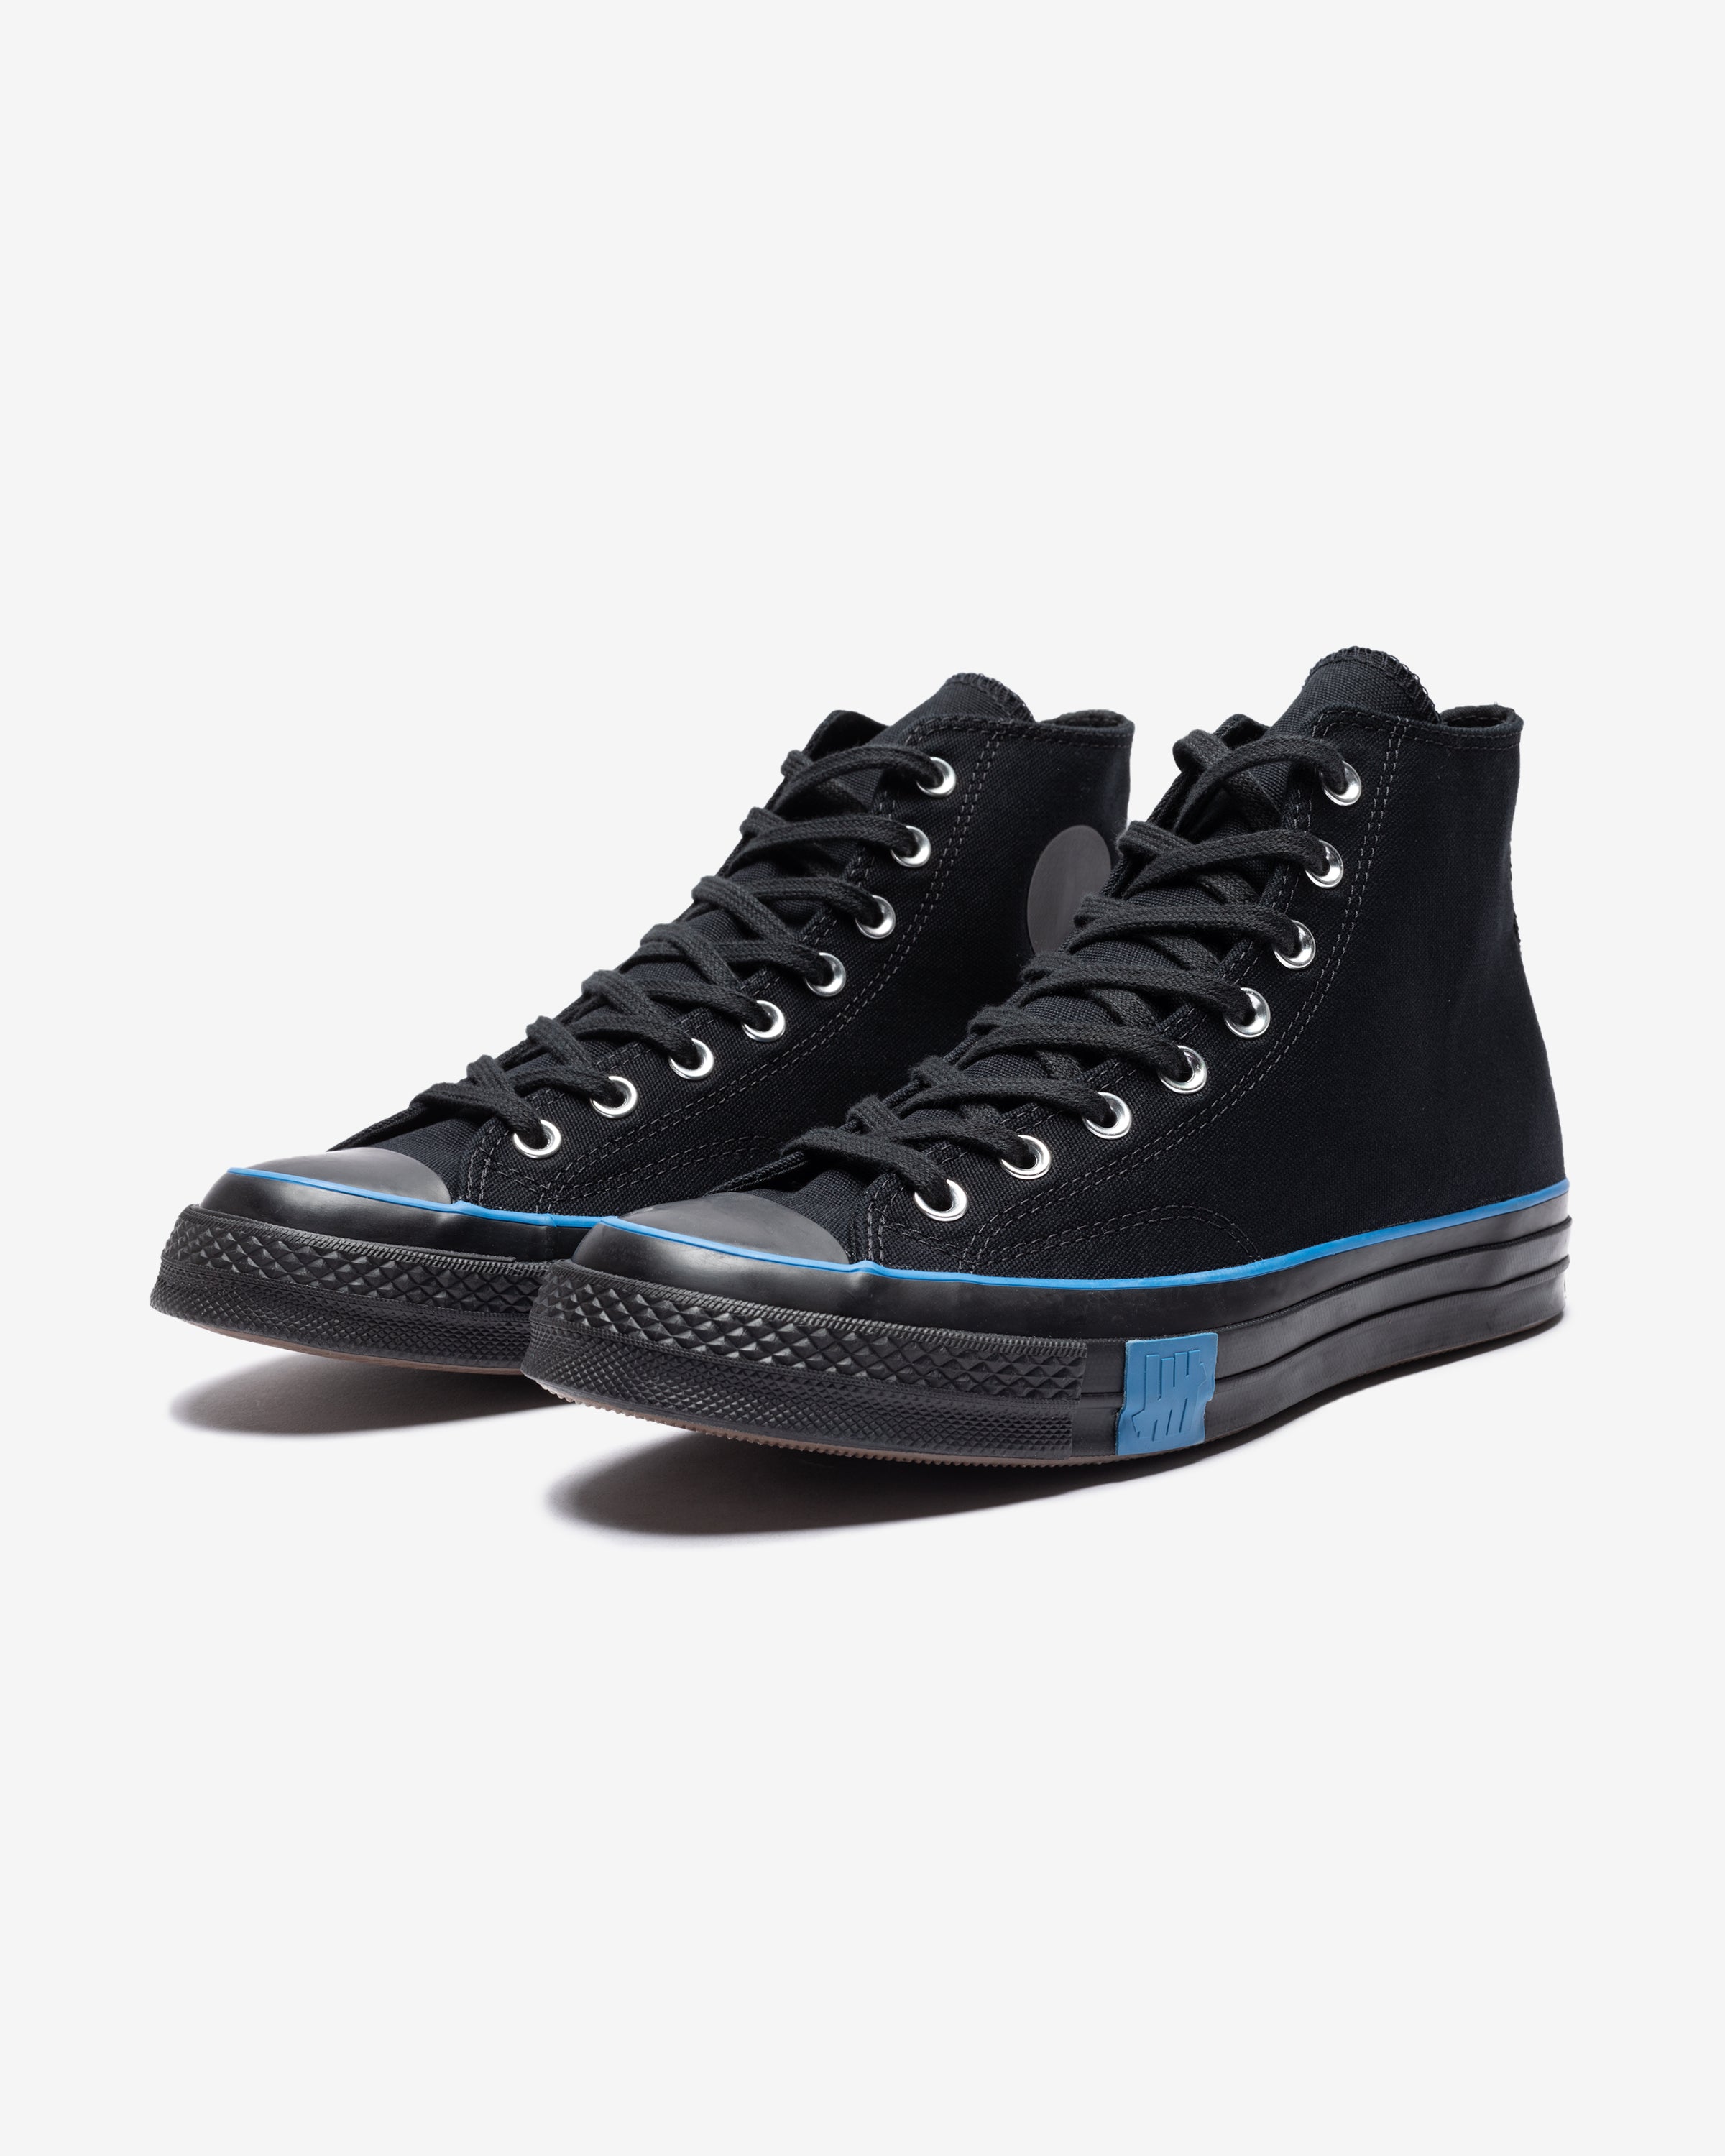 converse all star undefeated,Quality 